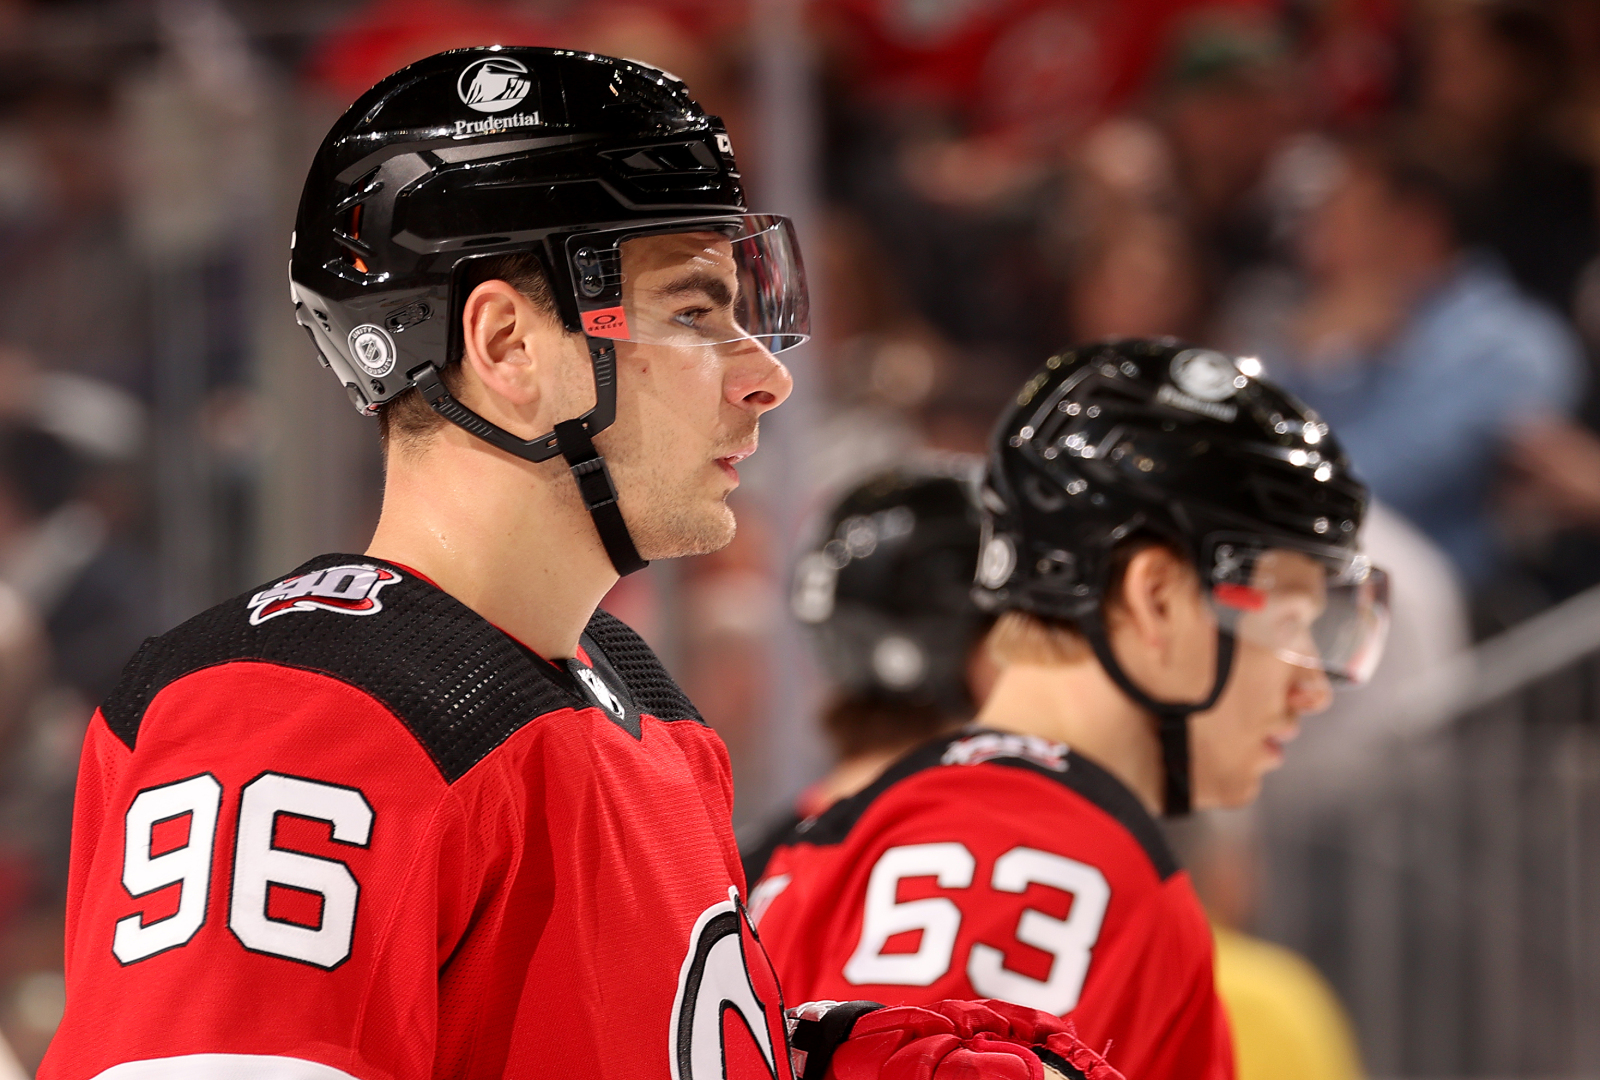 New Jersey Devils' Dawson Mercer: Comparables for Next Deal